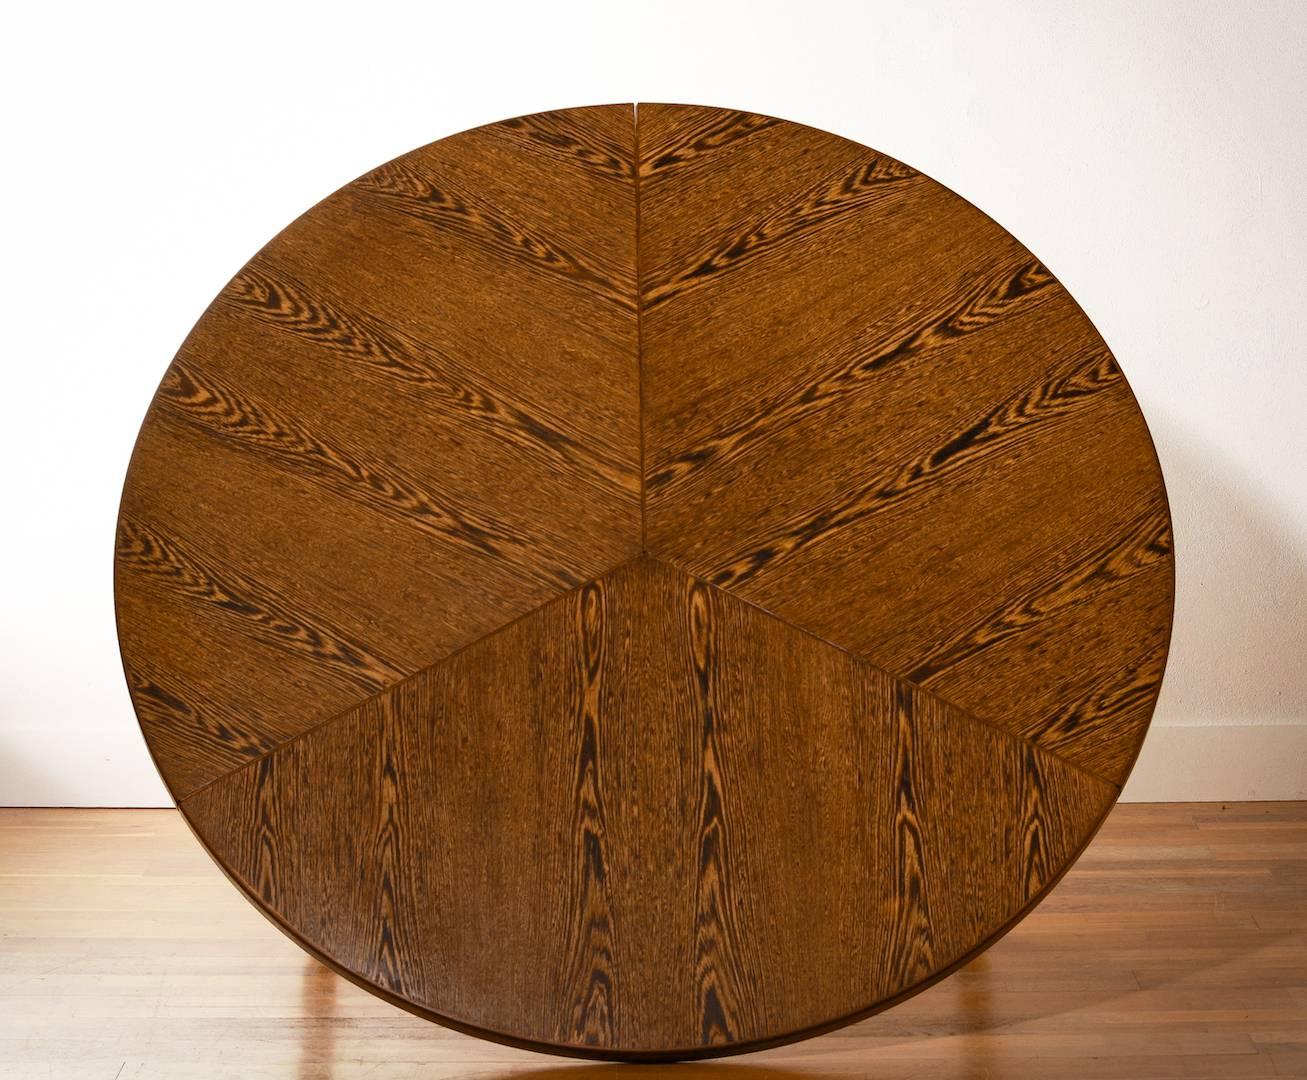 Beautiful dining table.

Designed by Karl-Erik Ekselius.

Made by Joc design Vetlanda.

The tabletop is made of wenge wood with a teak border.

The veneer is in mirror image placed.

On the original aluminium stand.

Dimensions are ø of